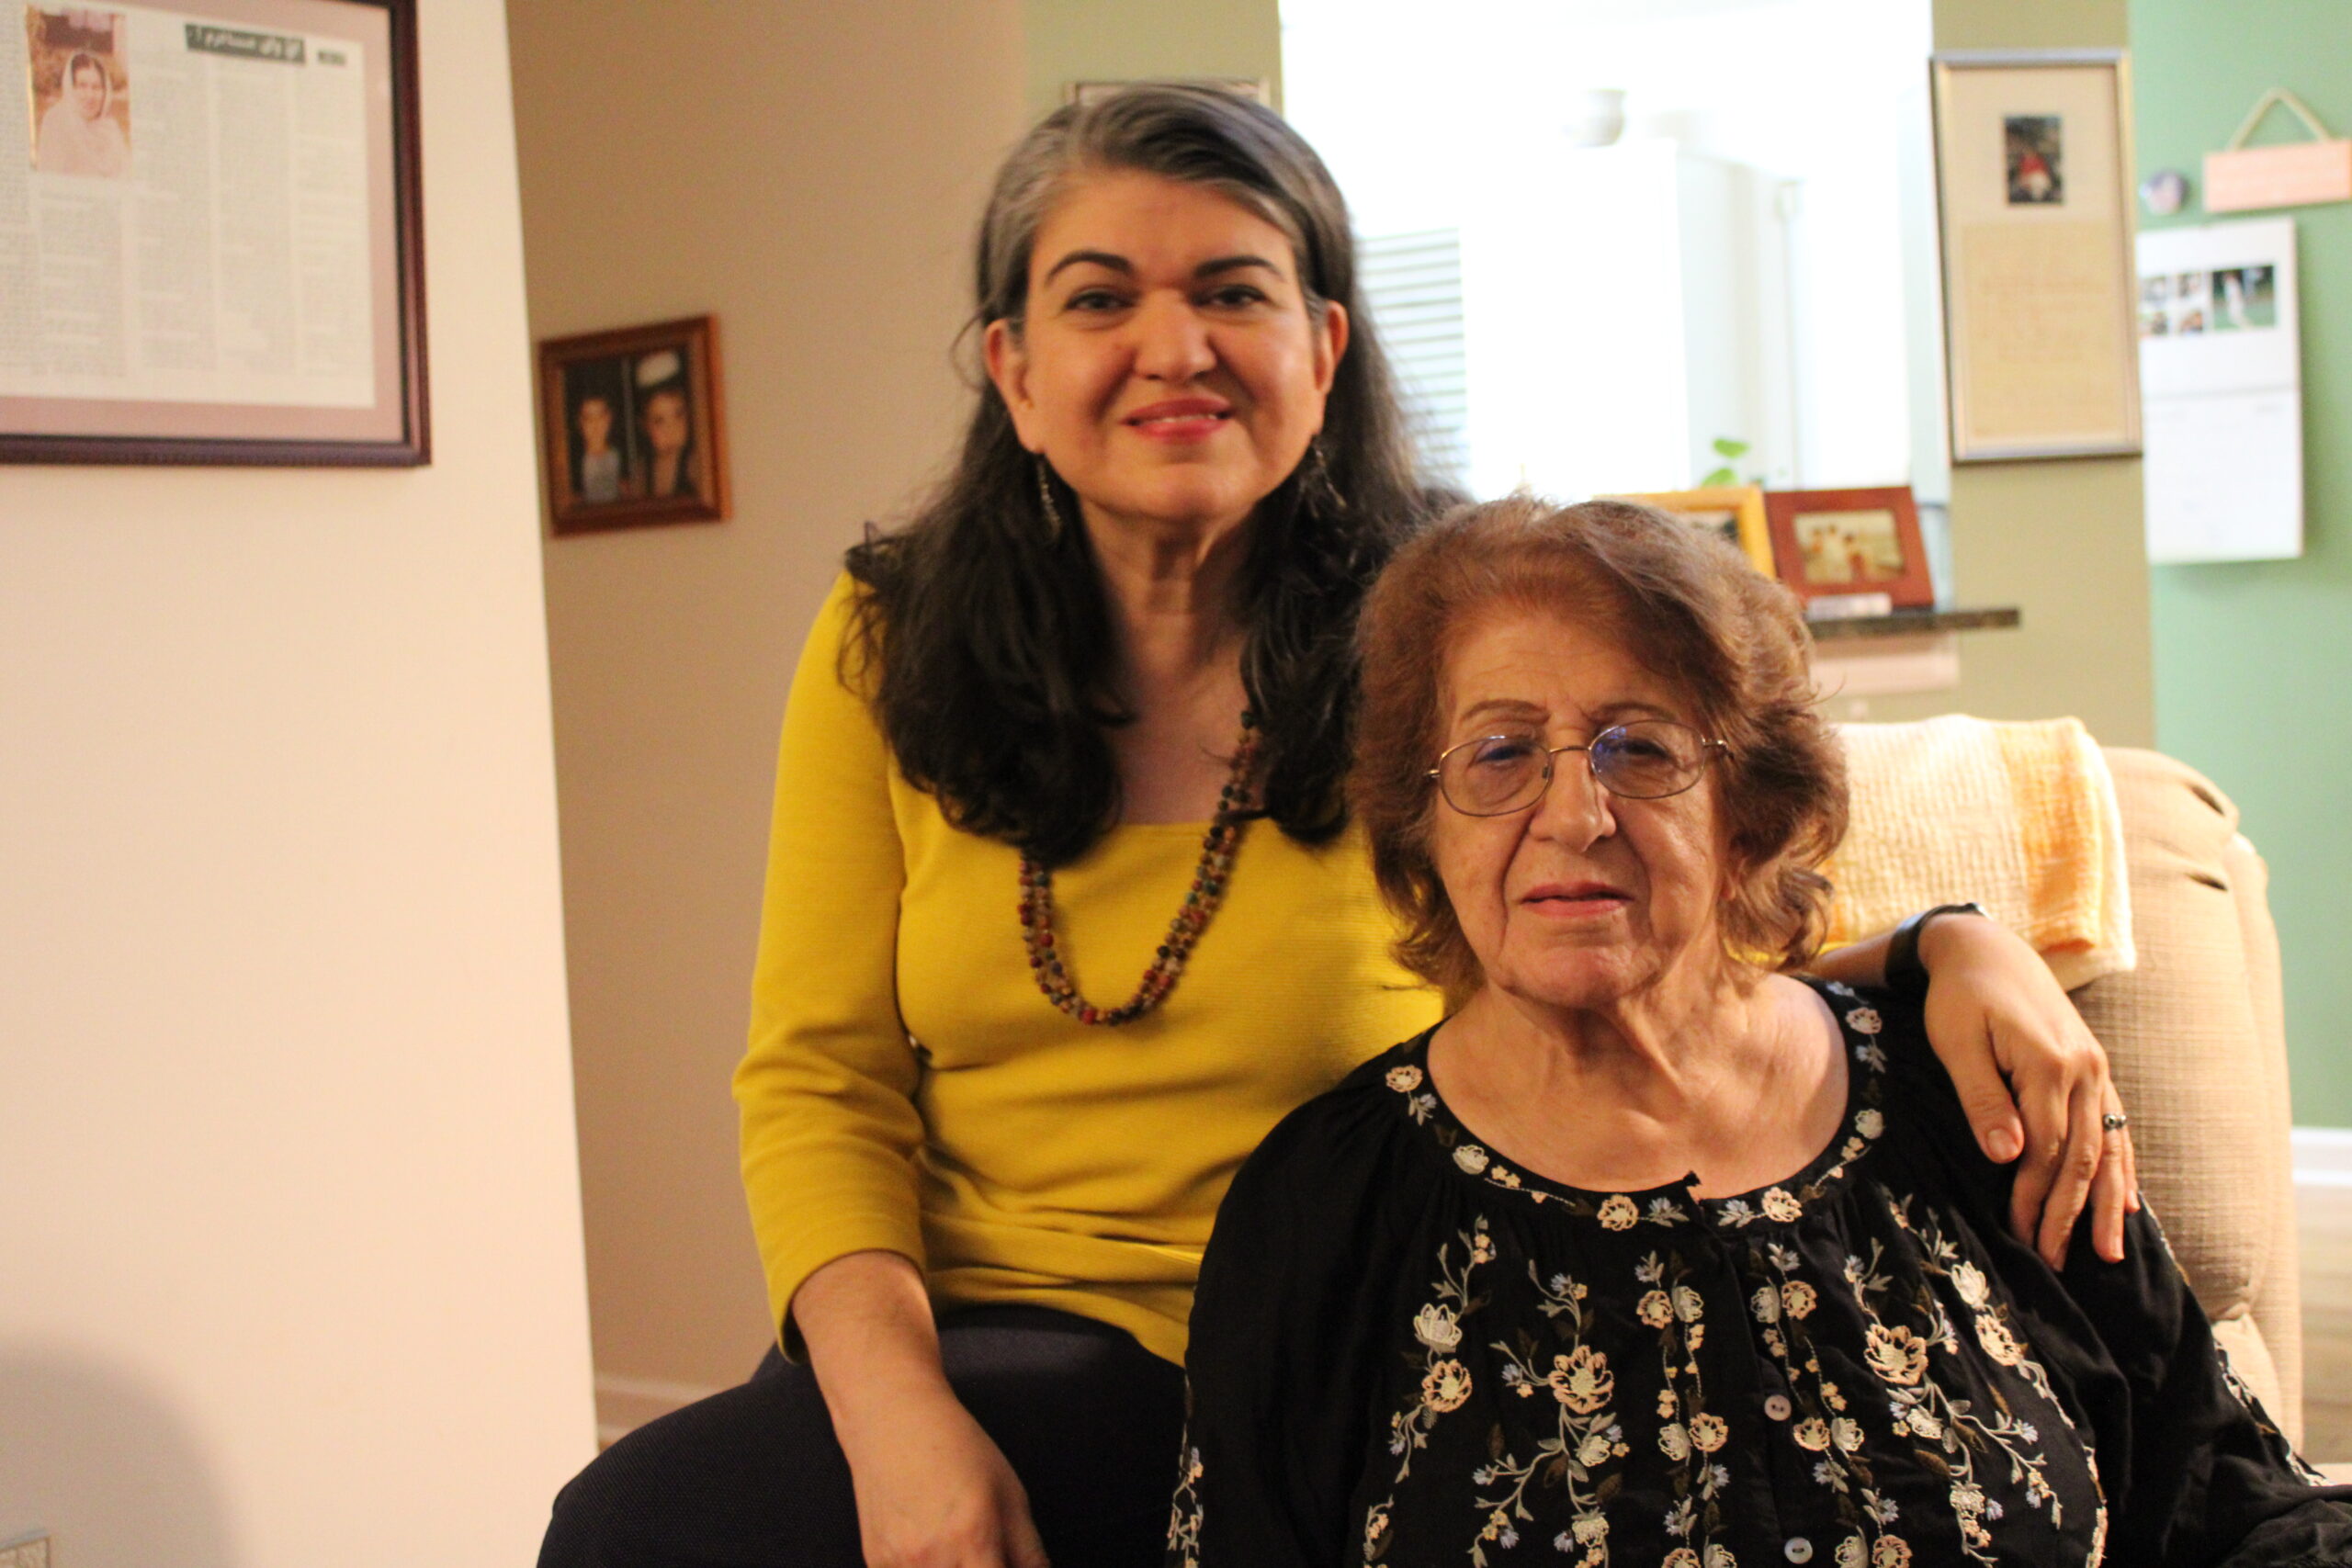 Mariam Nassery with her daughter, Dr. Hogai Nassery, in her home in Avondale Estates